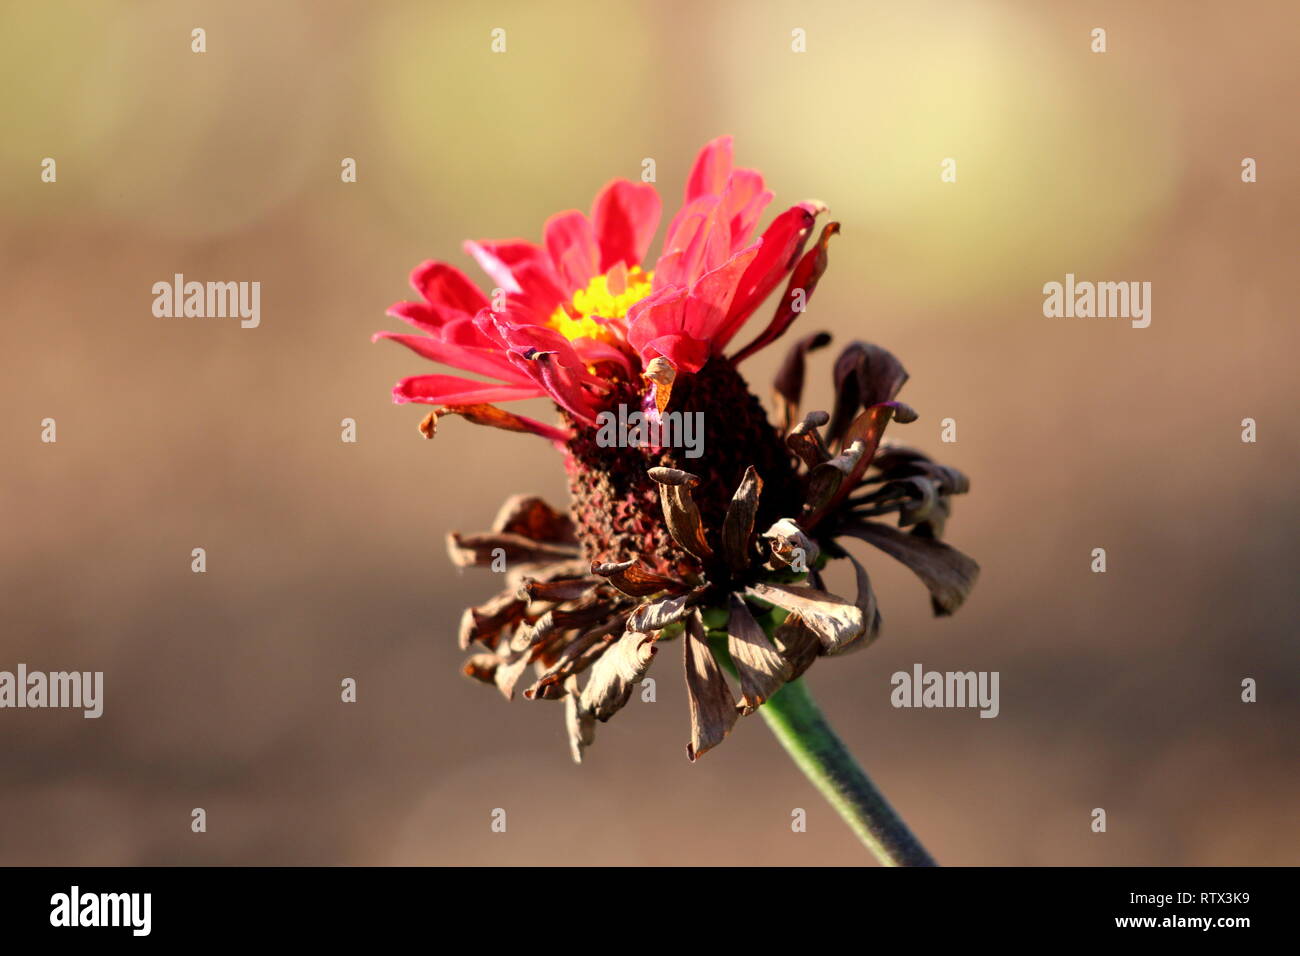 Multi layered light red Zinnia plant with partially dried flower containing layer of dried and one of bright red fresh petals with yellow center Stock Photo